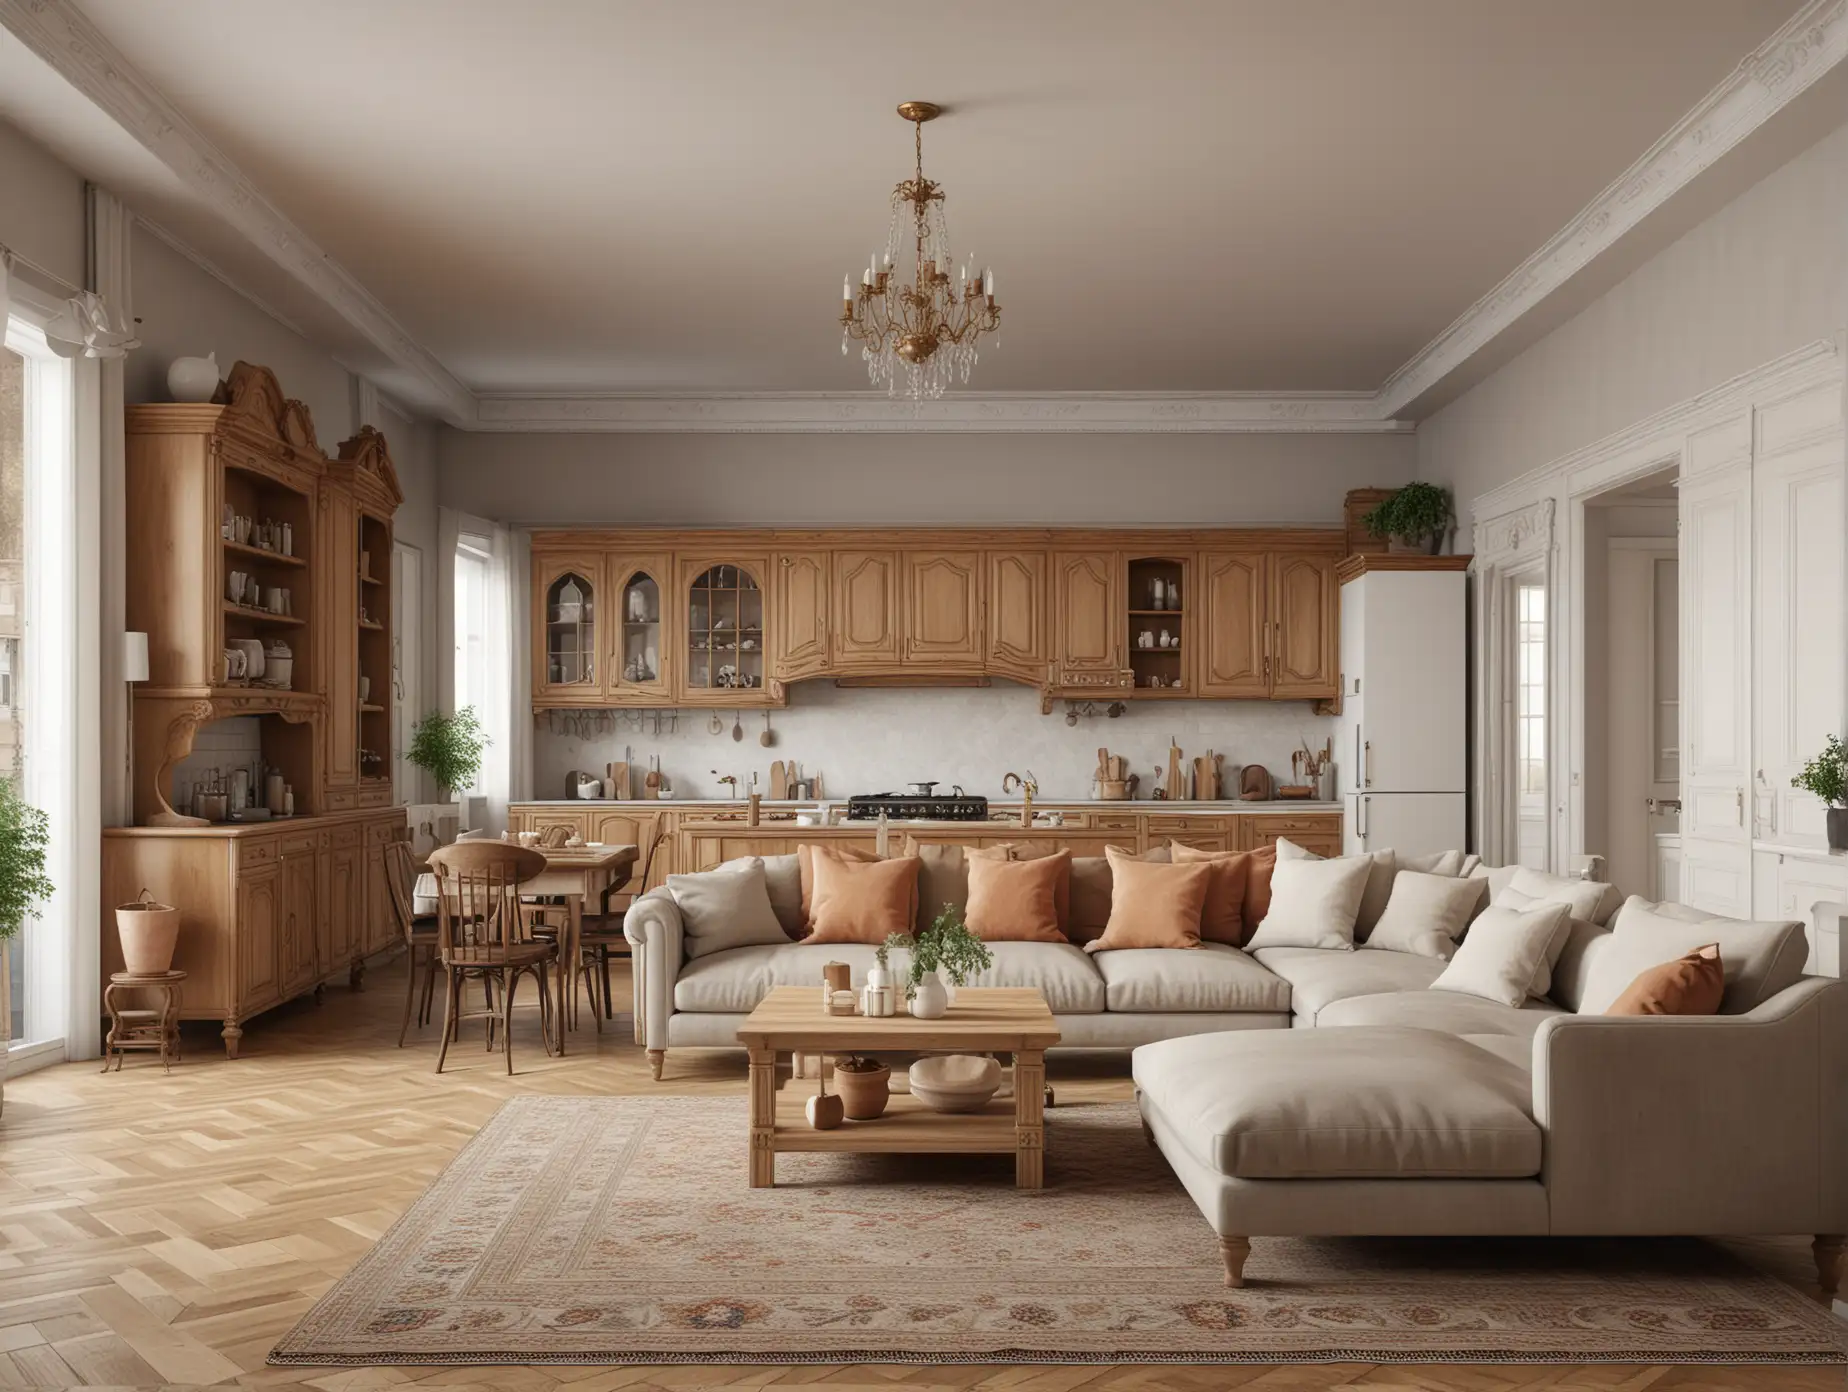 a living room with a couch and a kitchen, a flemish Baroque by Tivadar Csontváry Kosztka, featured on shutterstock, arbeitsrat für kunst, 32k uhd, minimalist, vray